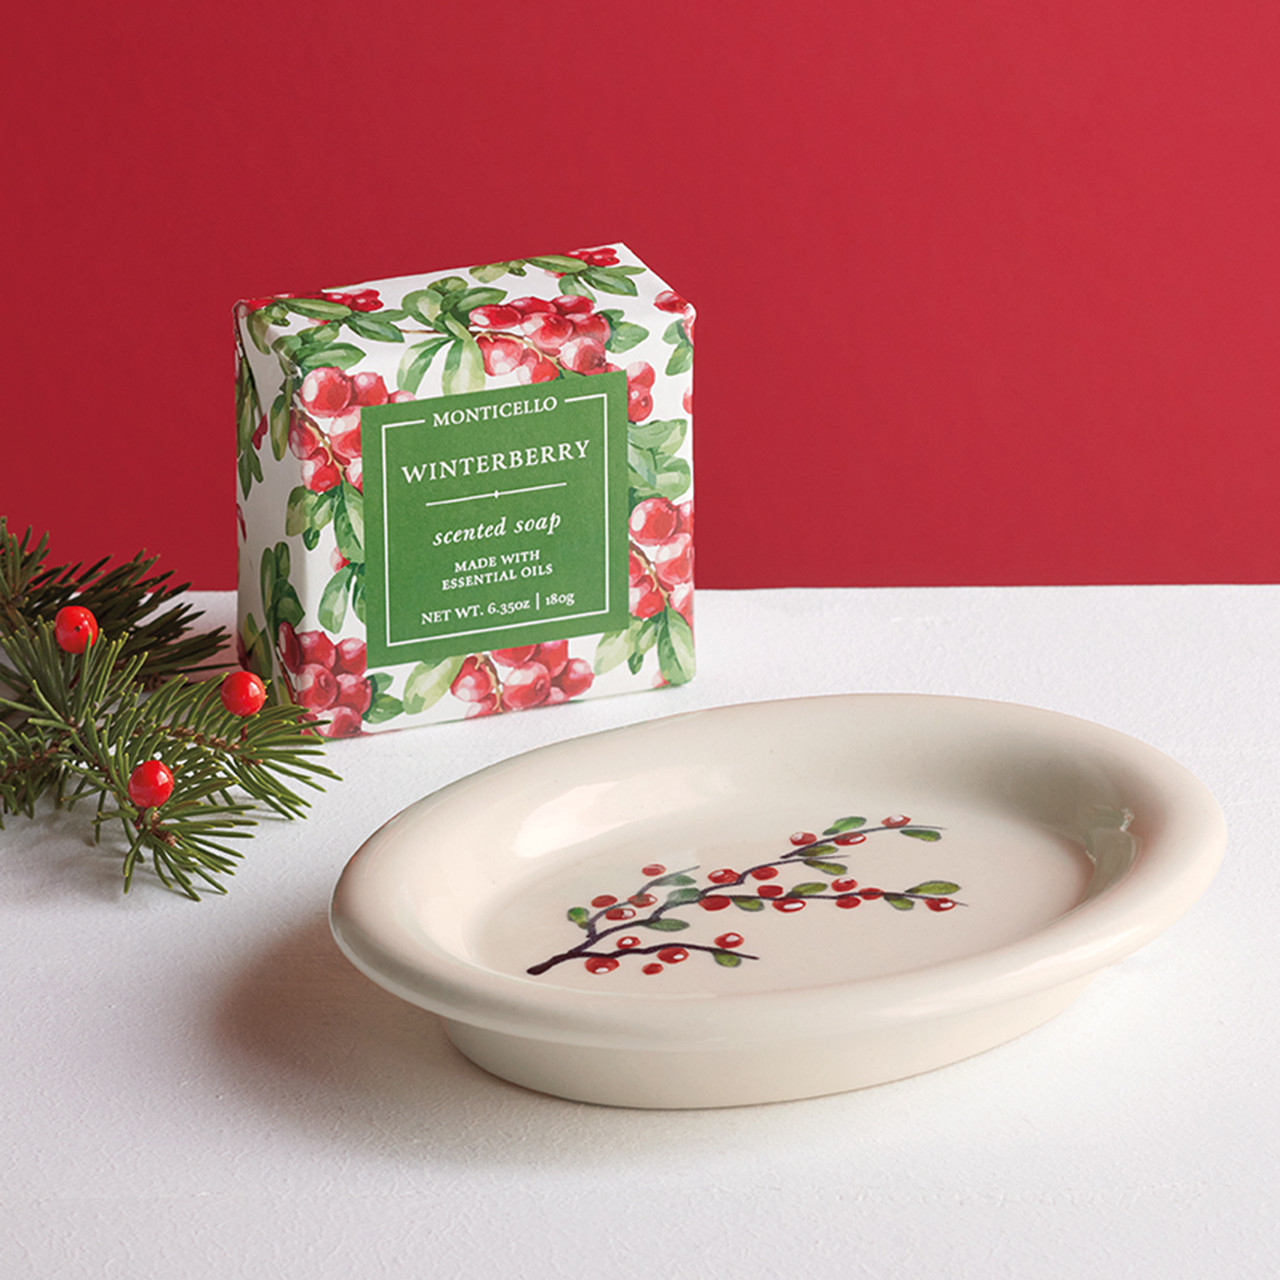 Ceramic dish with winter berry decoration and bar of soap